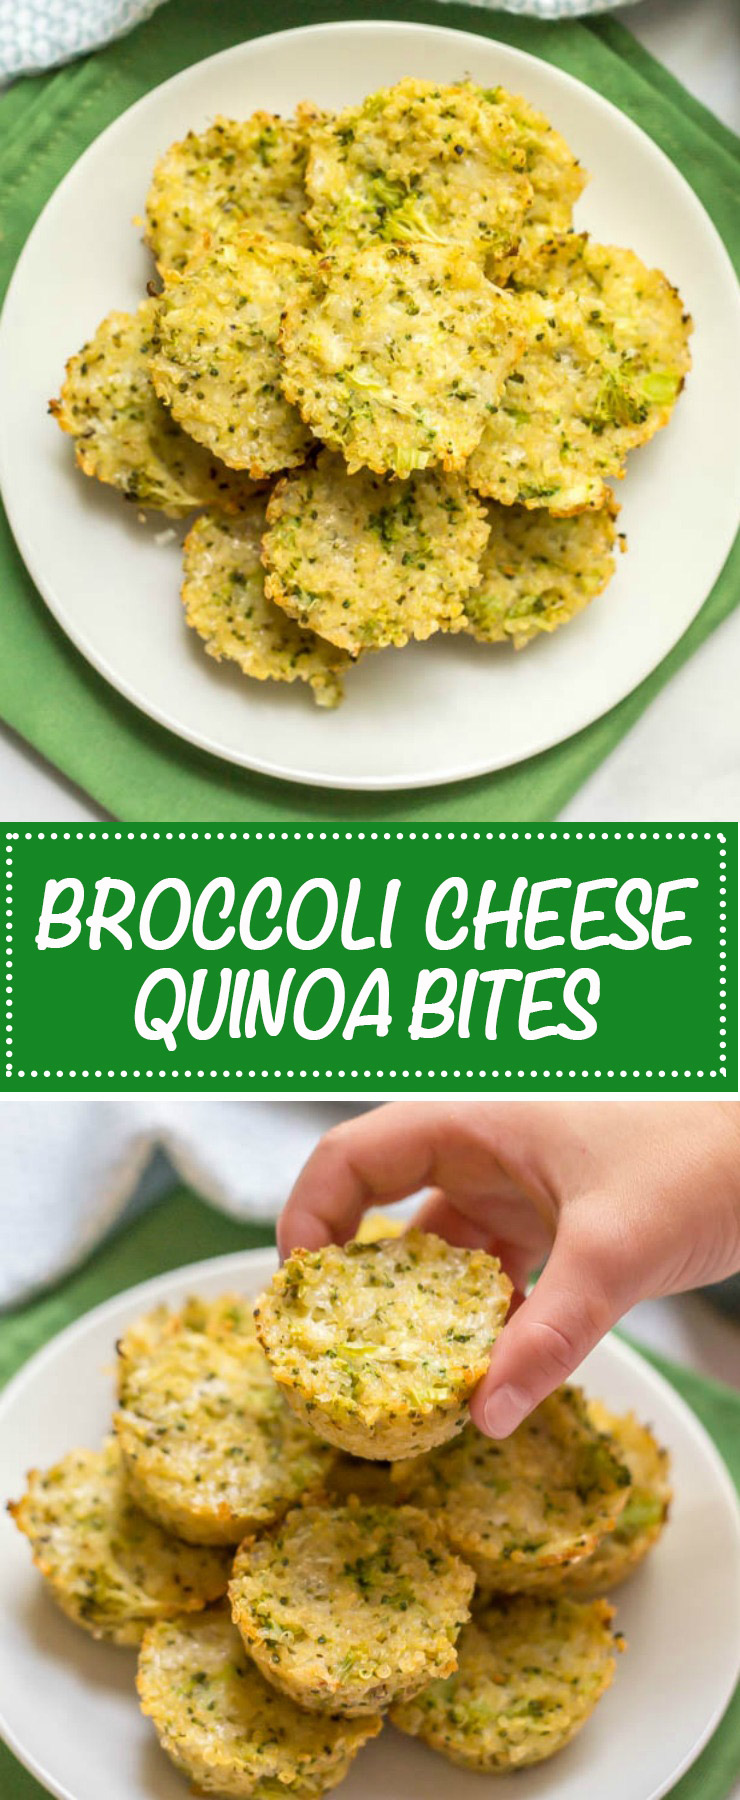 Broccoli cheese quinoa bites are an easy, wholesome finger food for toddlers — and adults! They go great with Ranch and are perfect for a school lunch! | www.familyfoodonthetable.com